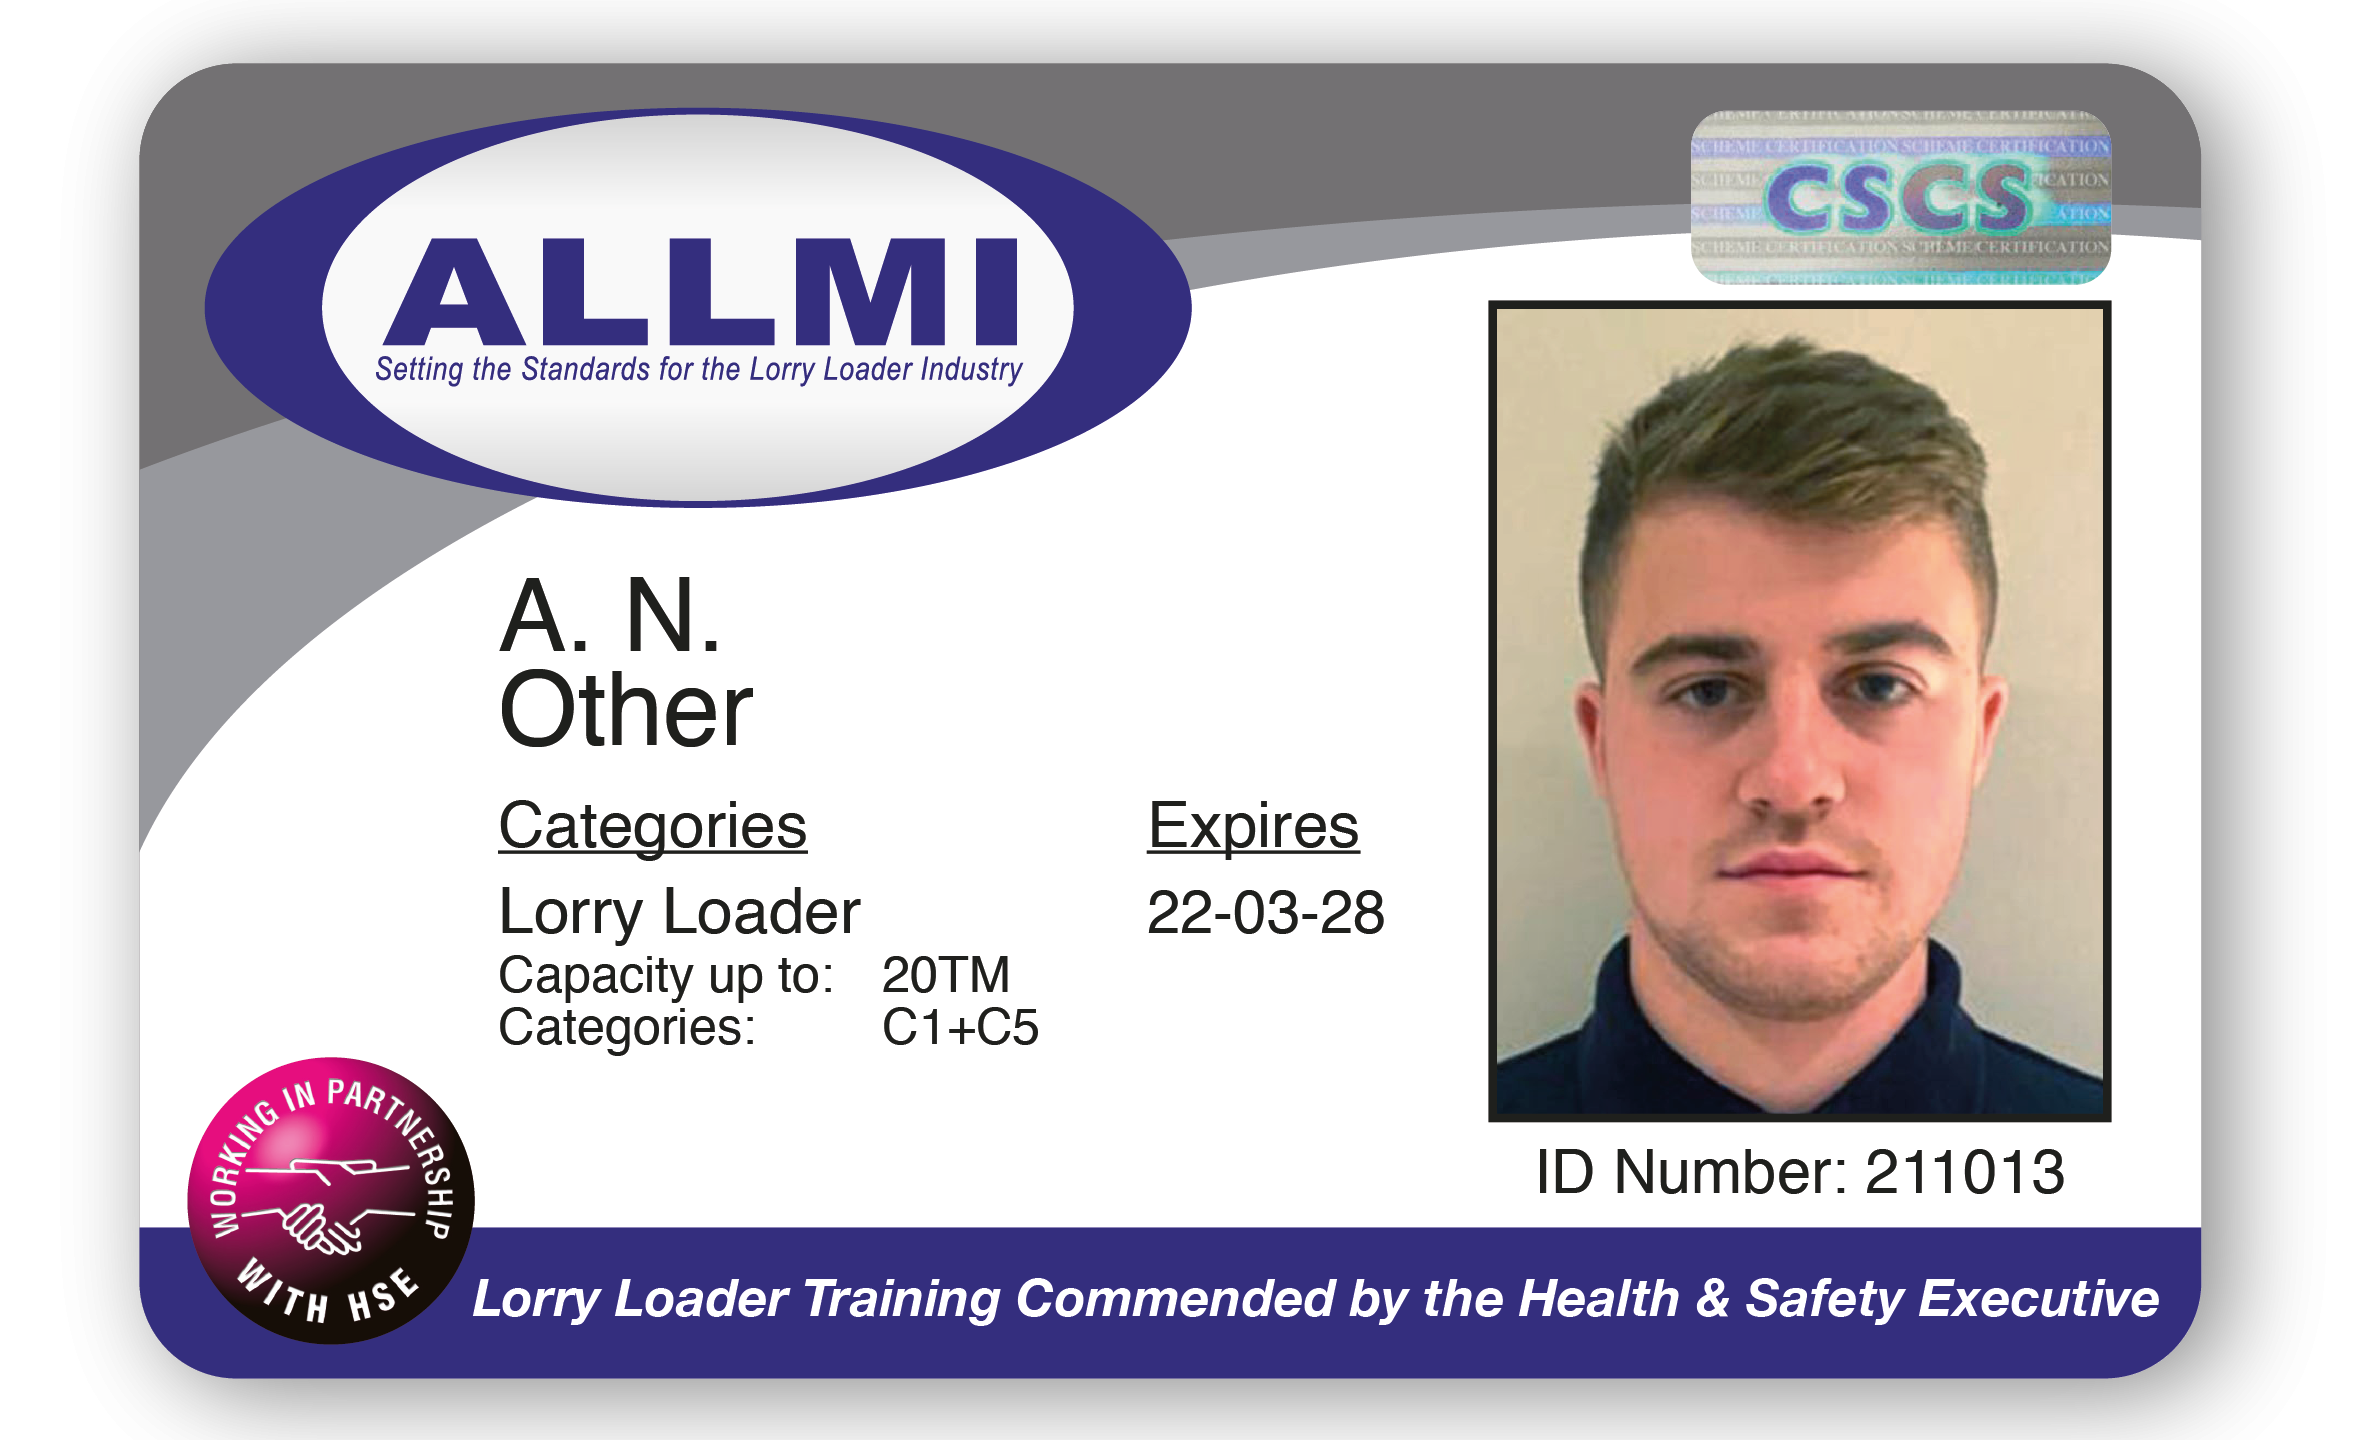 Association of Lorry Loader Manufacturers and Importers (ALLMI)